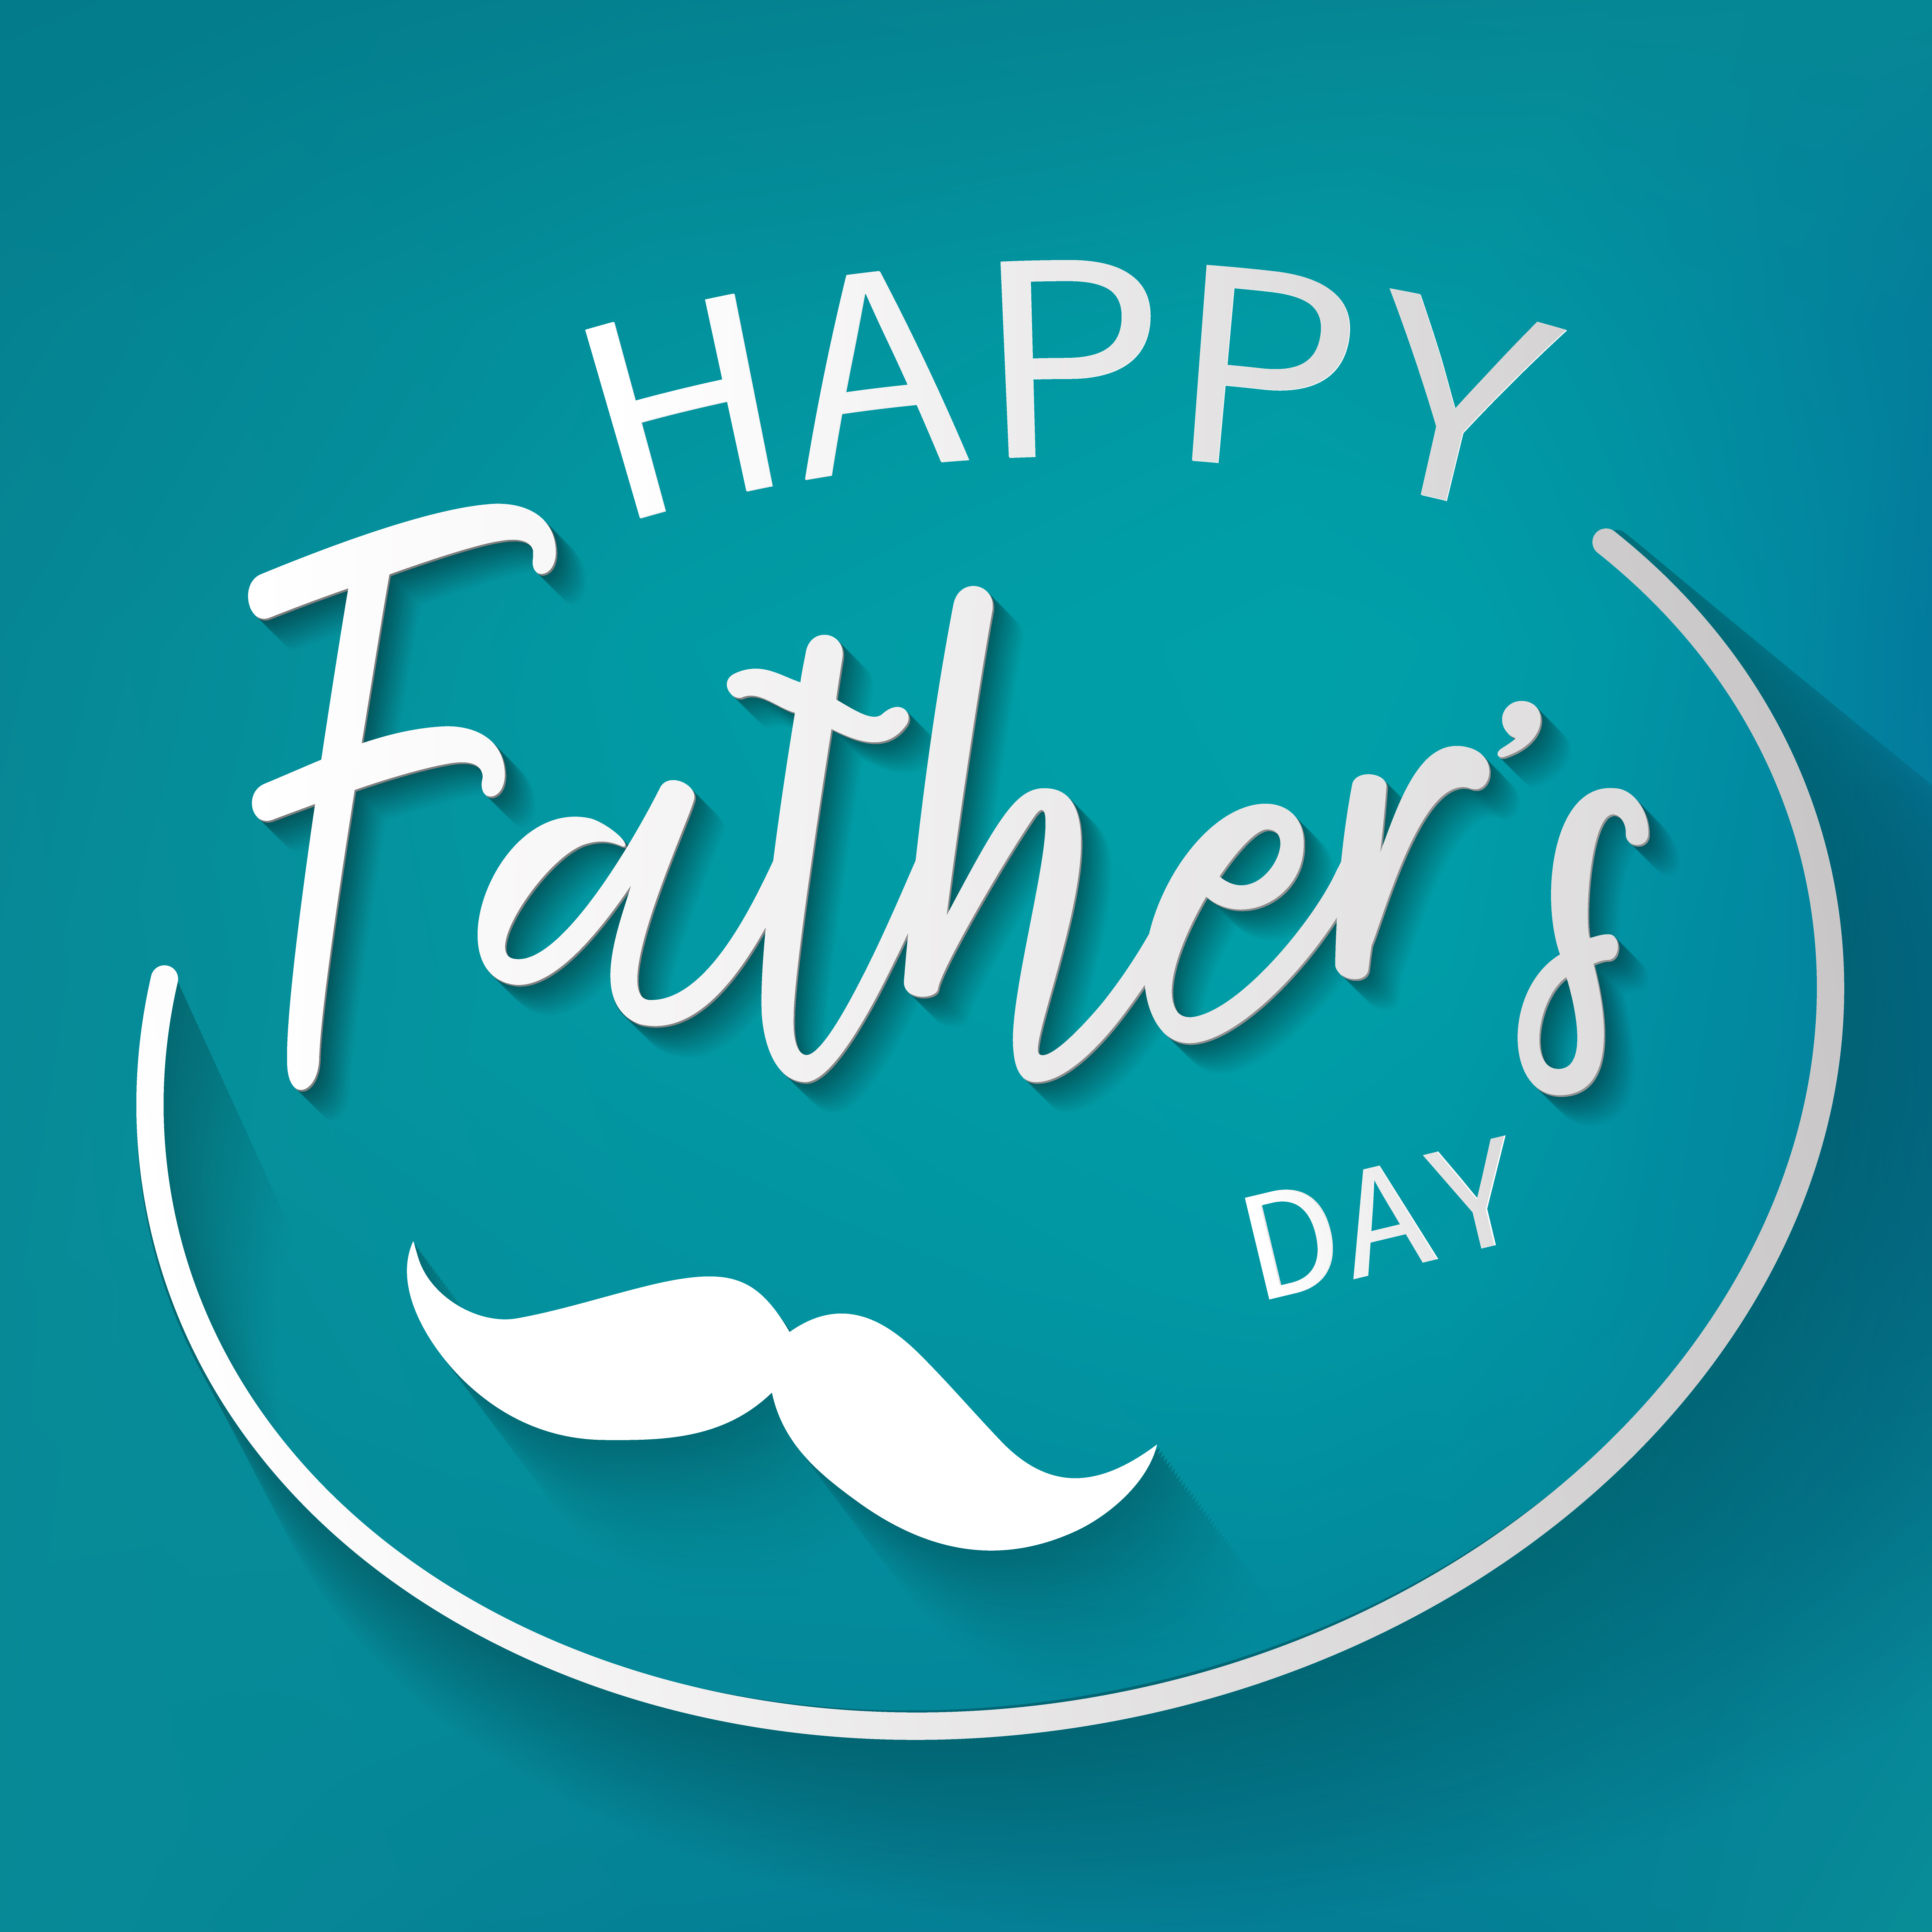 Happy father day graphic design background. Decoration and Celebration